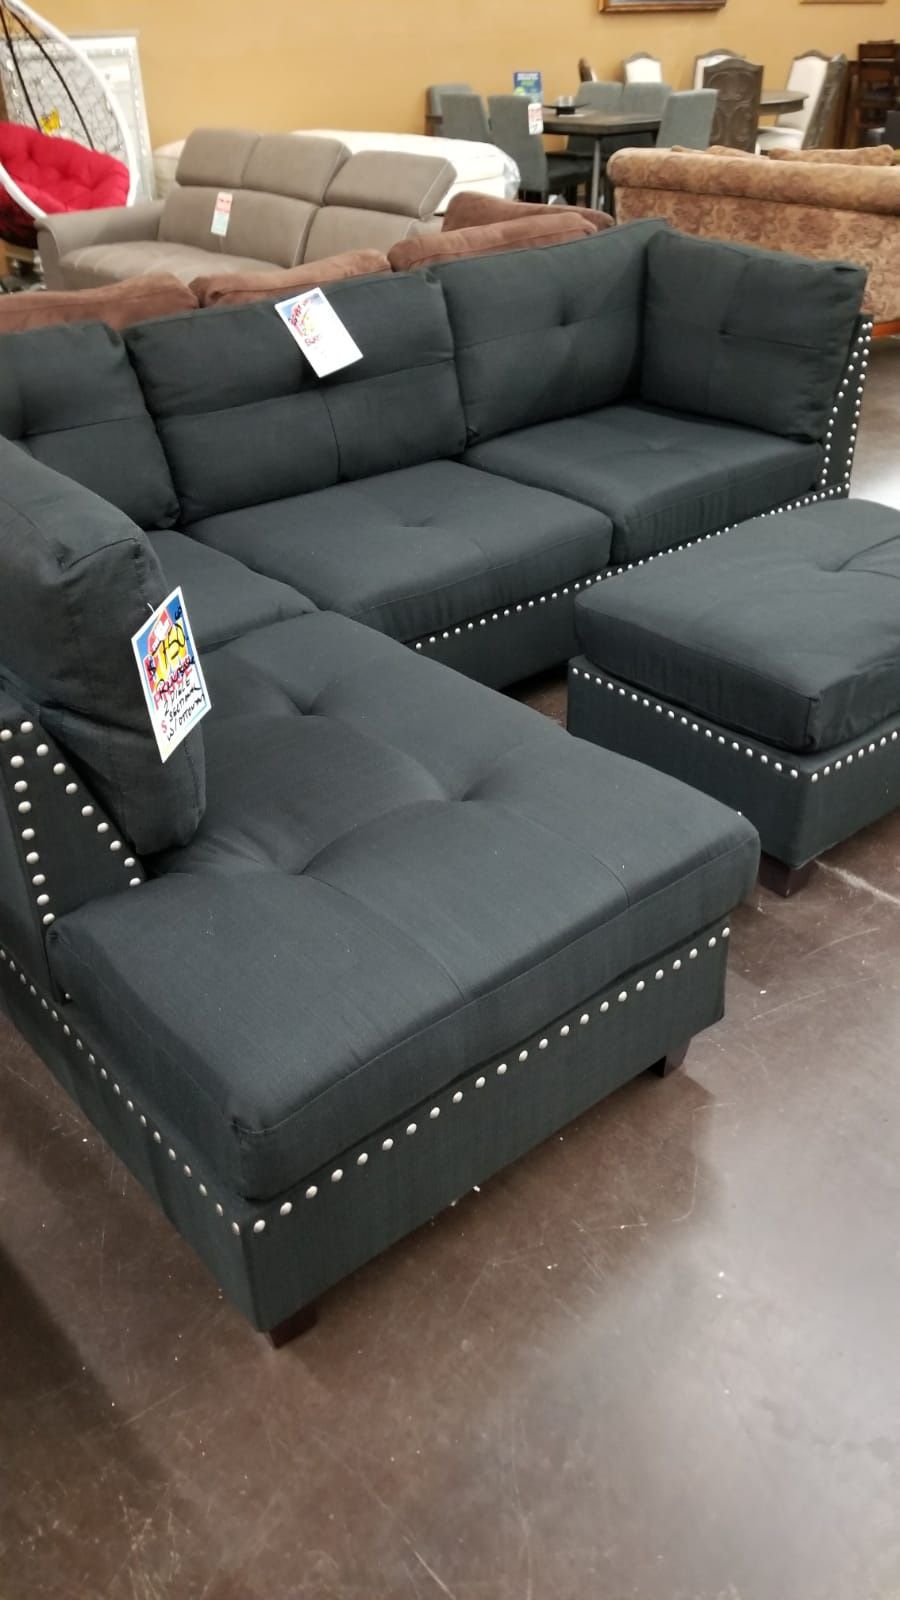 Traditional Black pinhead reversible sectional with a matching ottoman